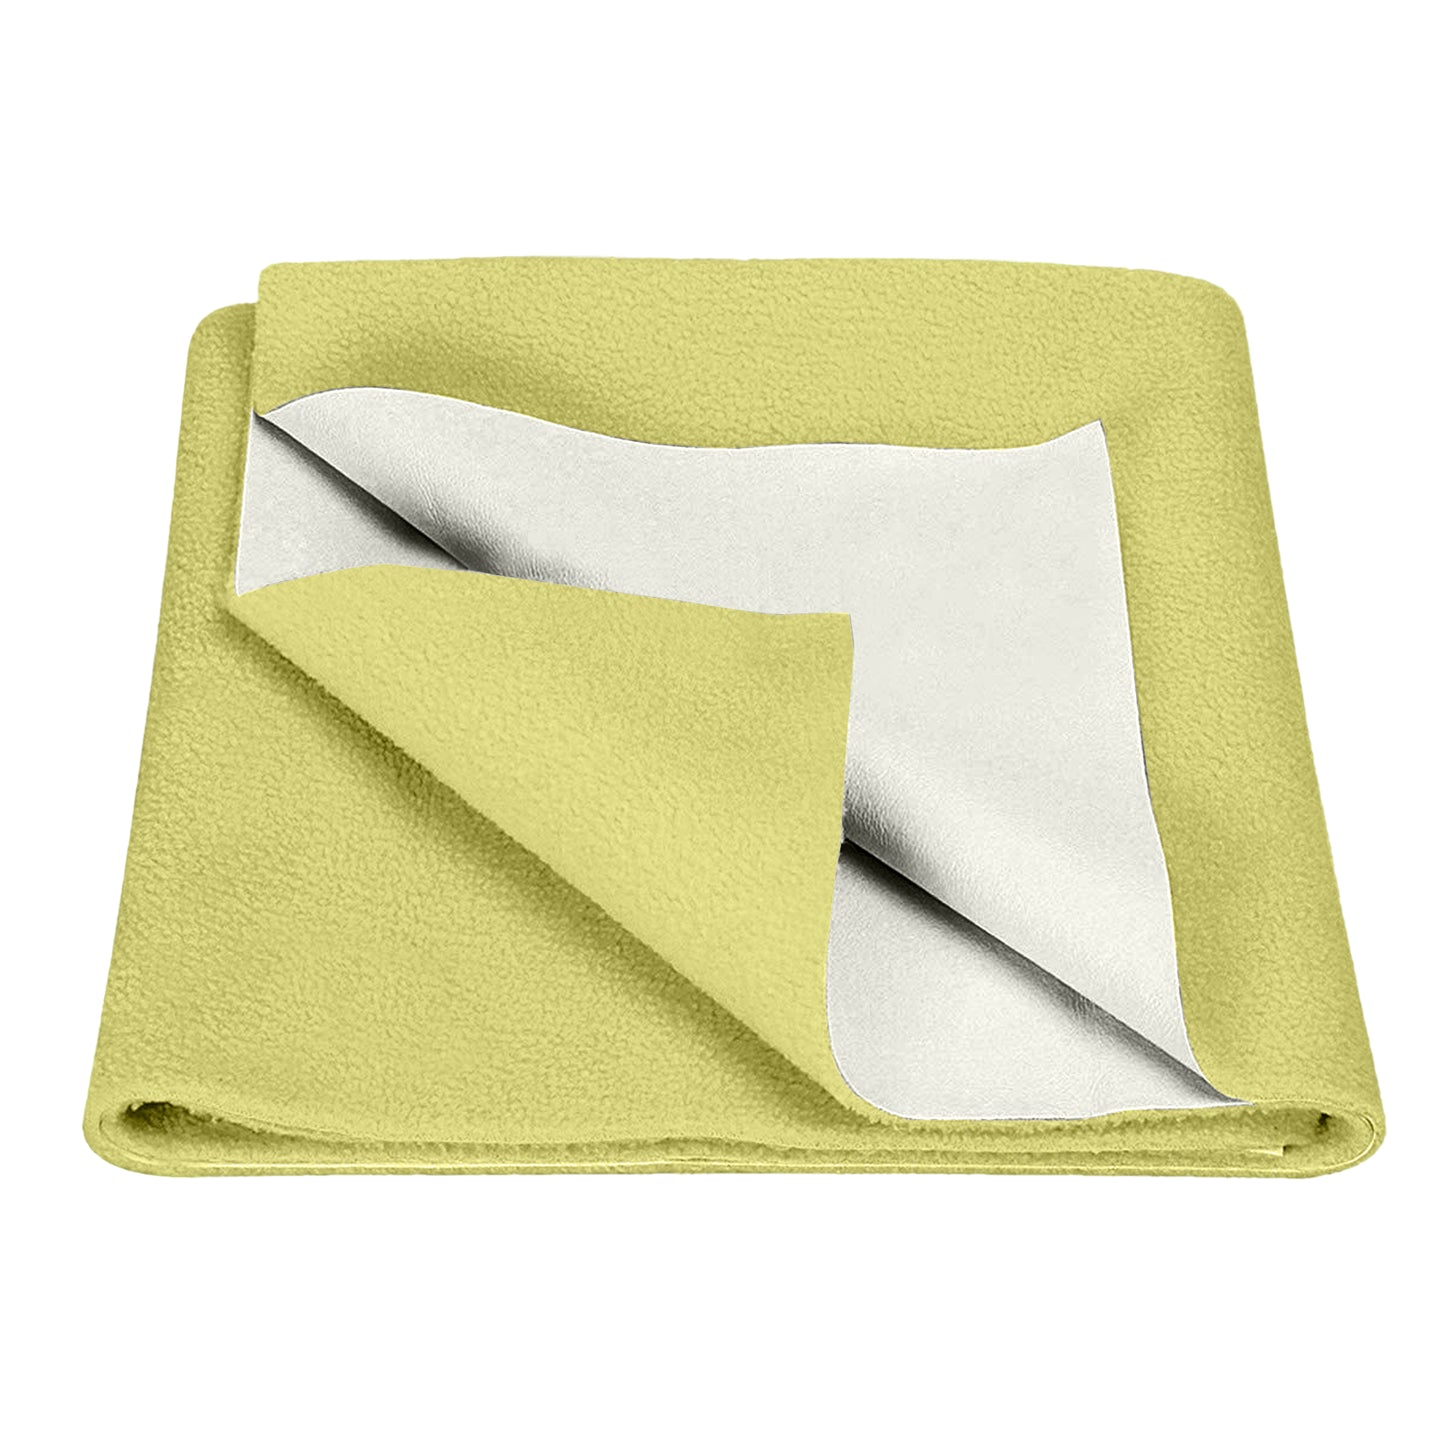 Waterproof Bed Protector, Extra Absorbent Quick Dry Sheet, Baby Bed Protector (70 X 50 CM), Pack of 2 -YELLOW